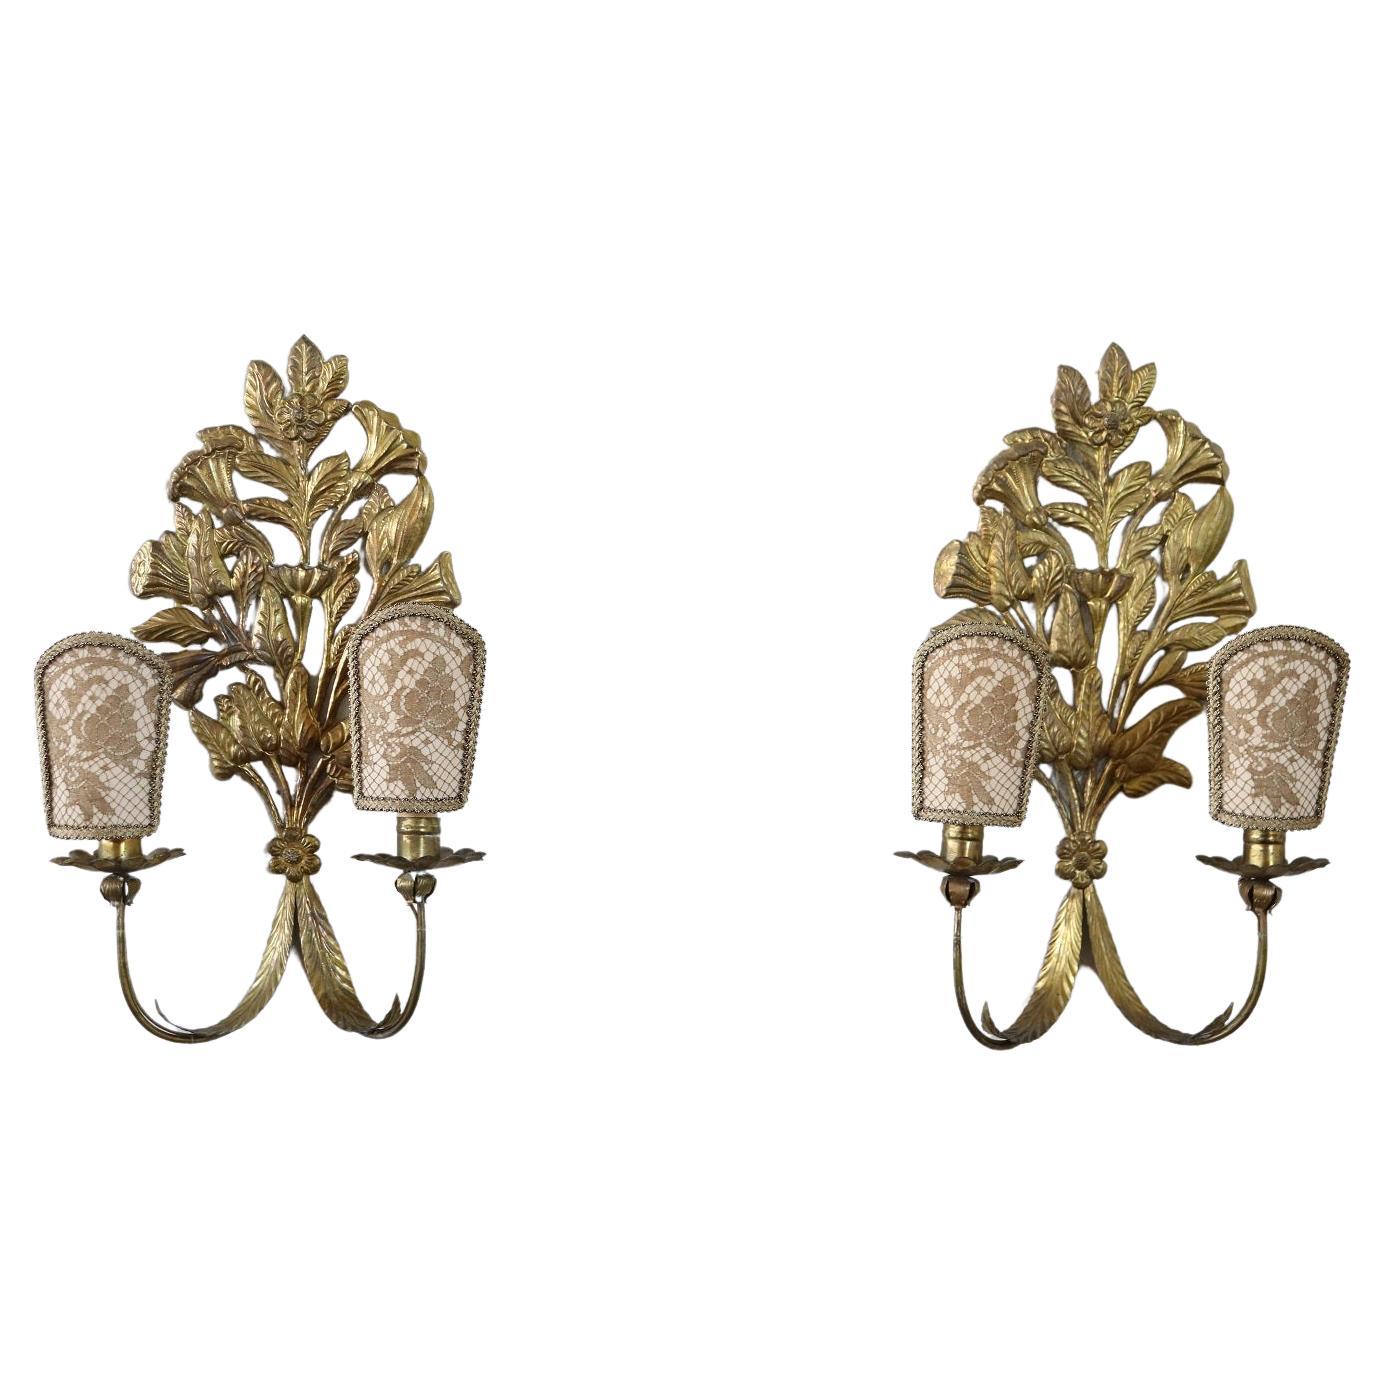 Early 20th Century Italian Pair of Wall Lights or Sconces in Gilded Metal